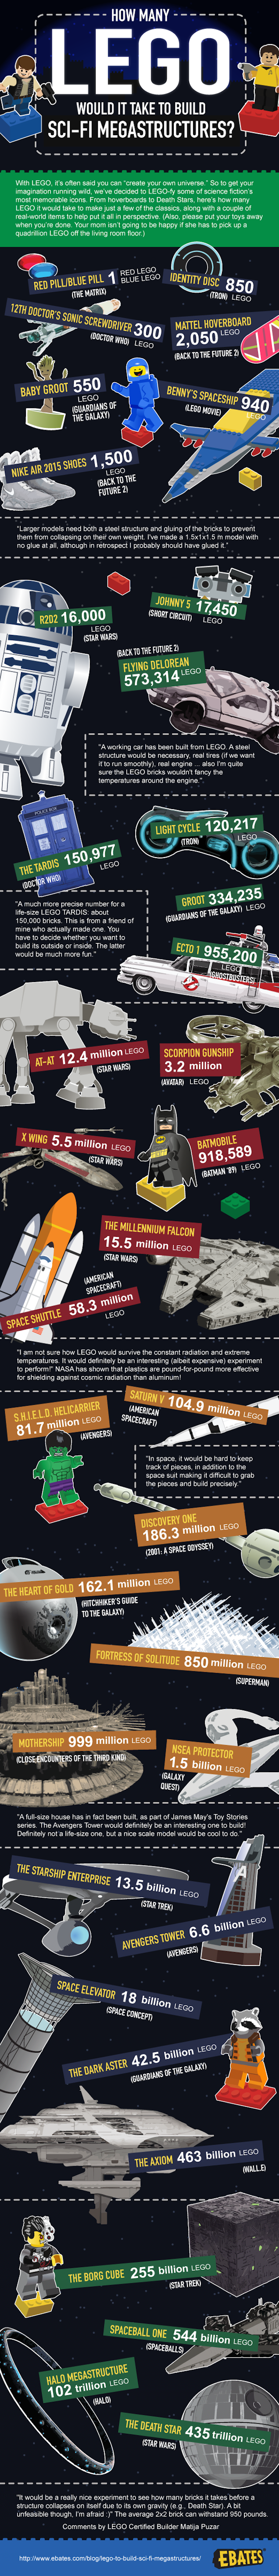 How Many Lego Bricks Would It Take To Build Famous Sci-Fi Structures And Vehicles